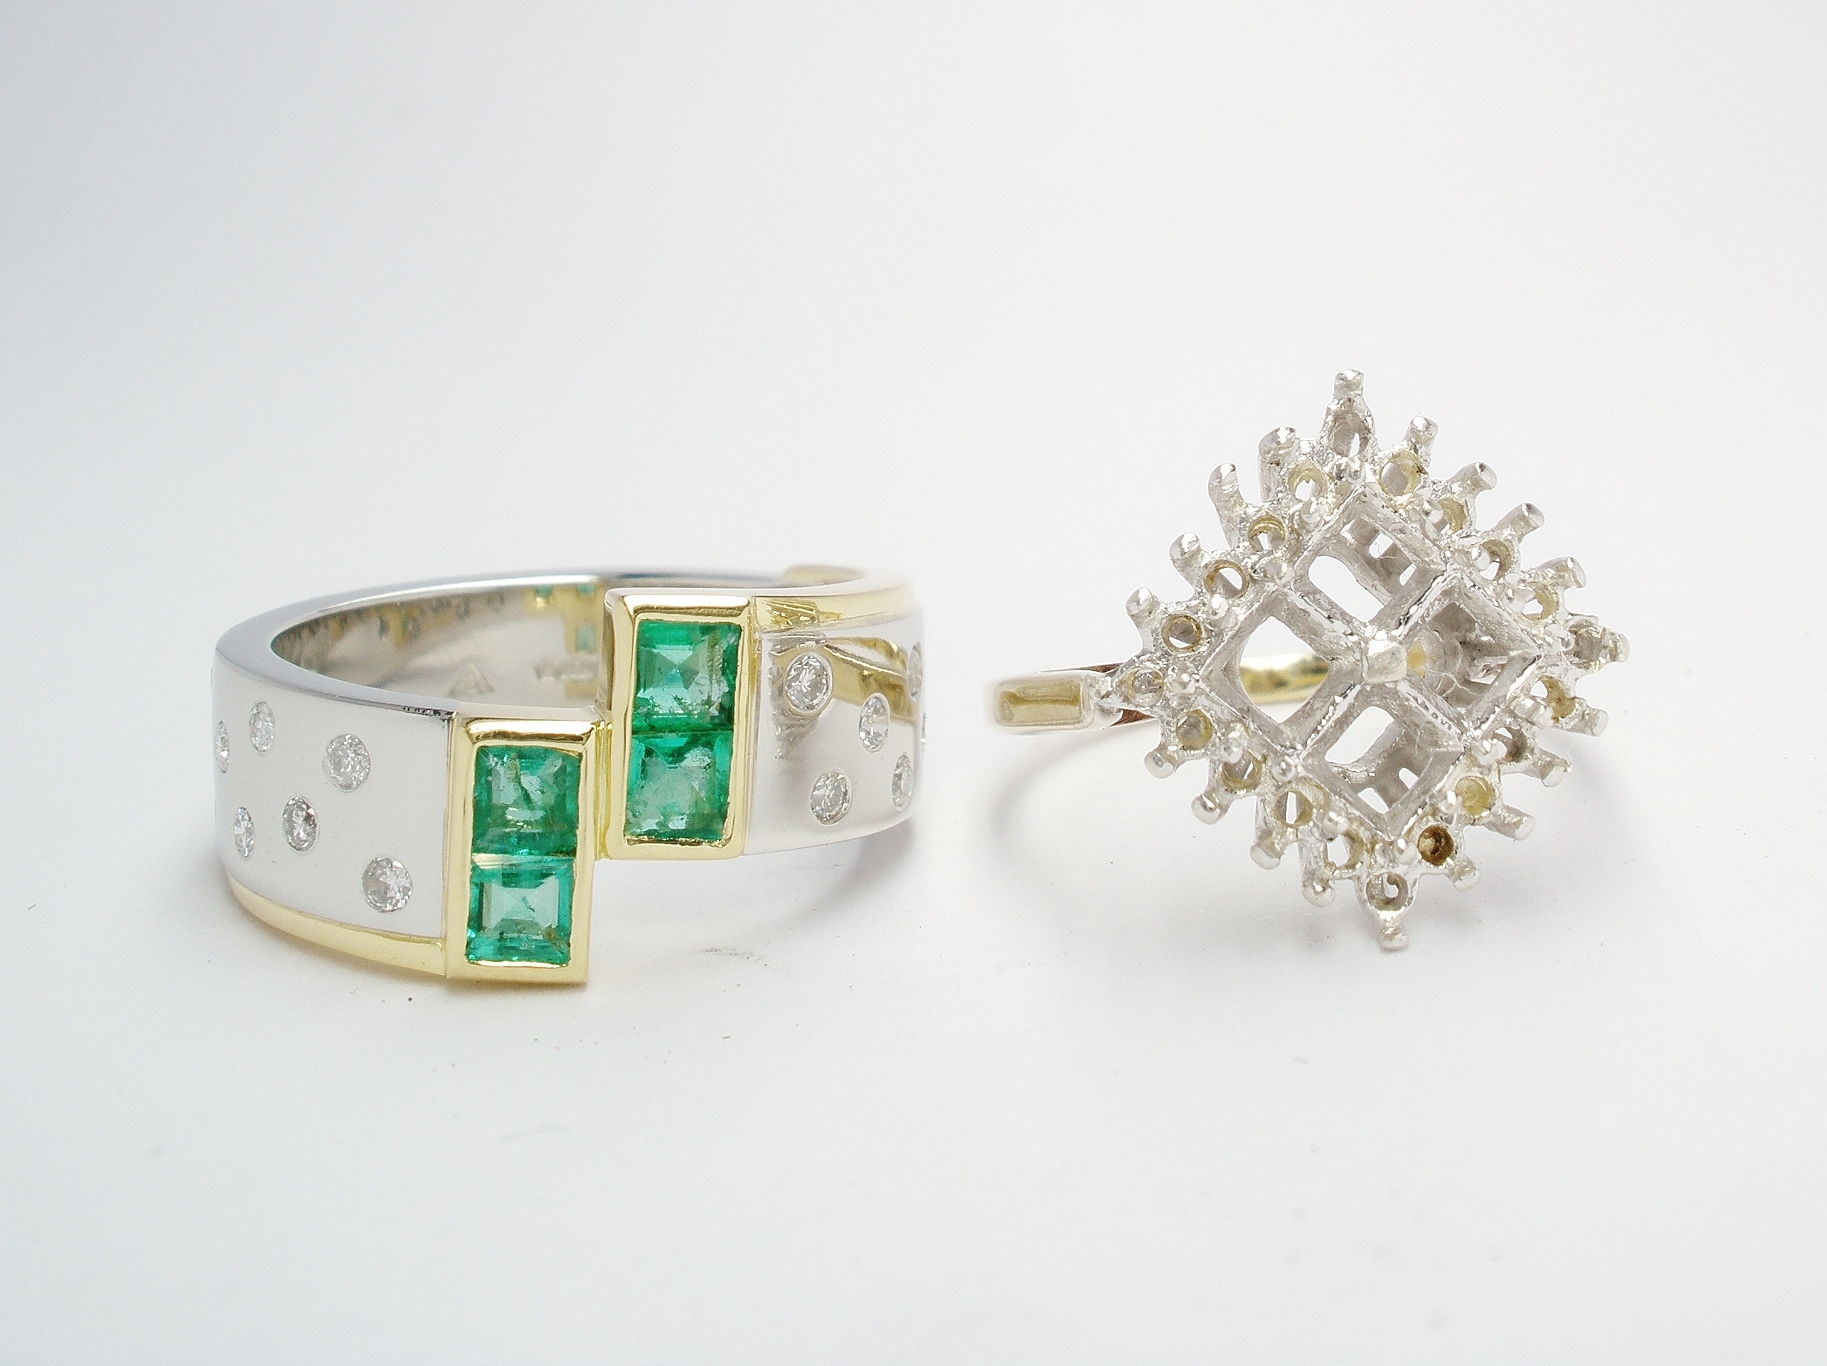 The 4 square cut emeralds rub-over set in 2 pairs creating a cross-over style and the diamonds flush set into the broad platinum shank. Finished